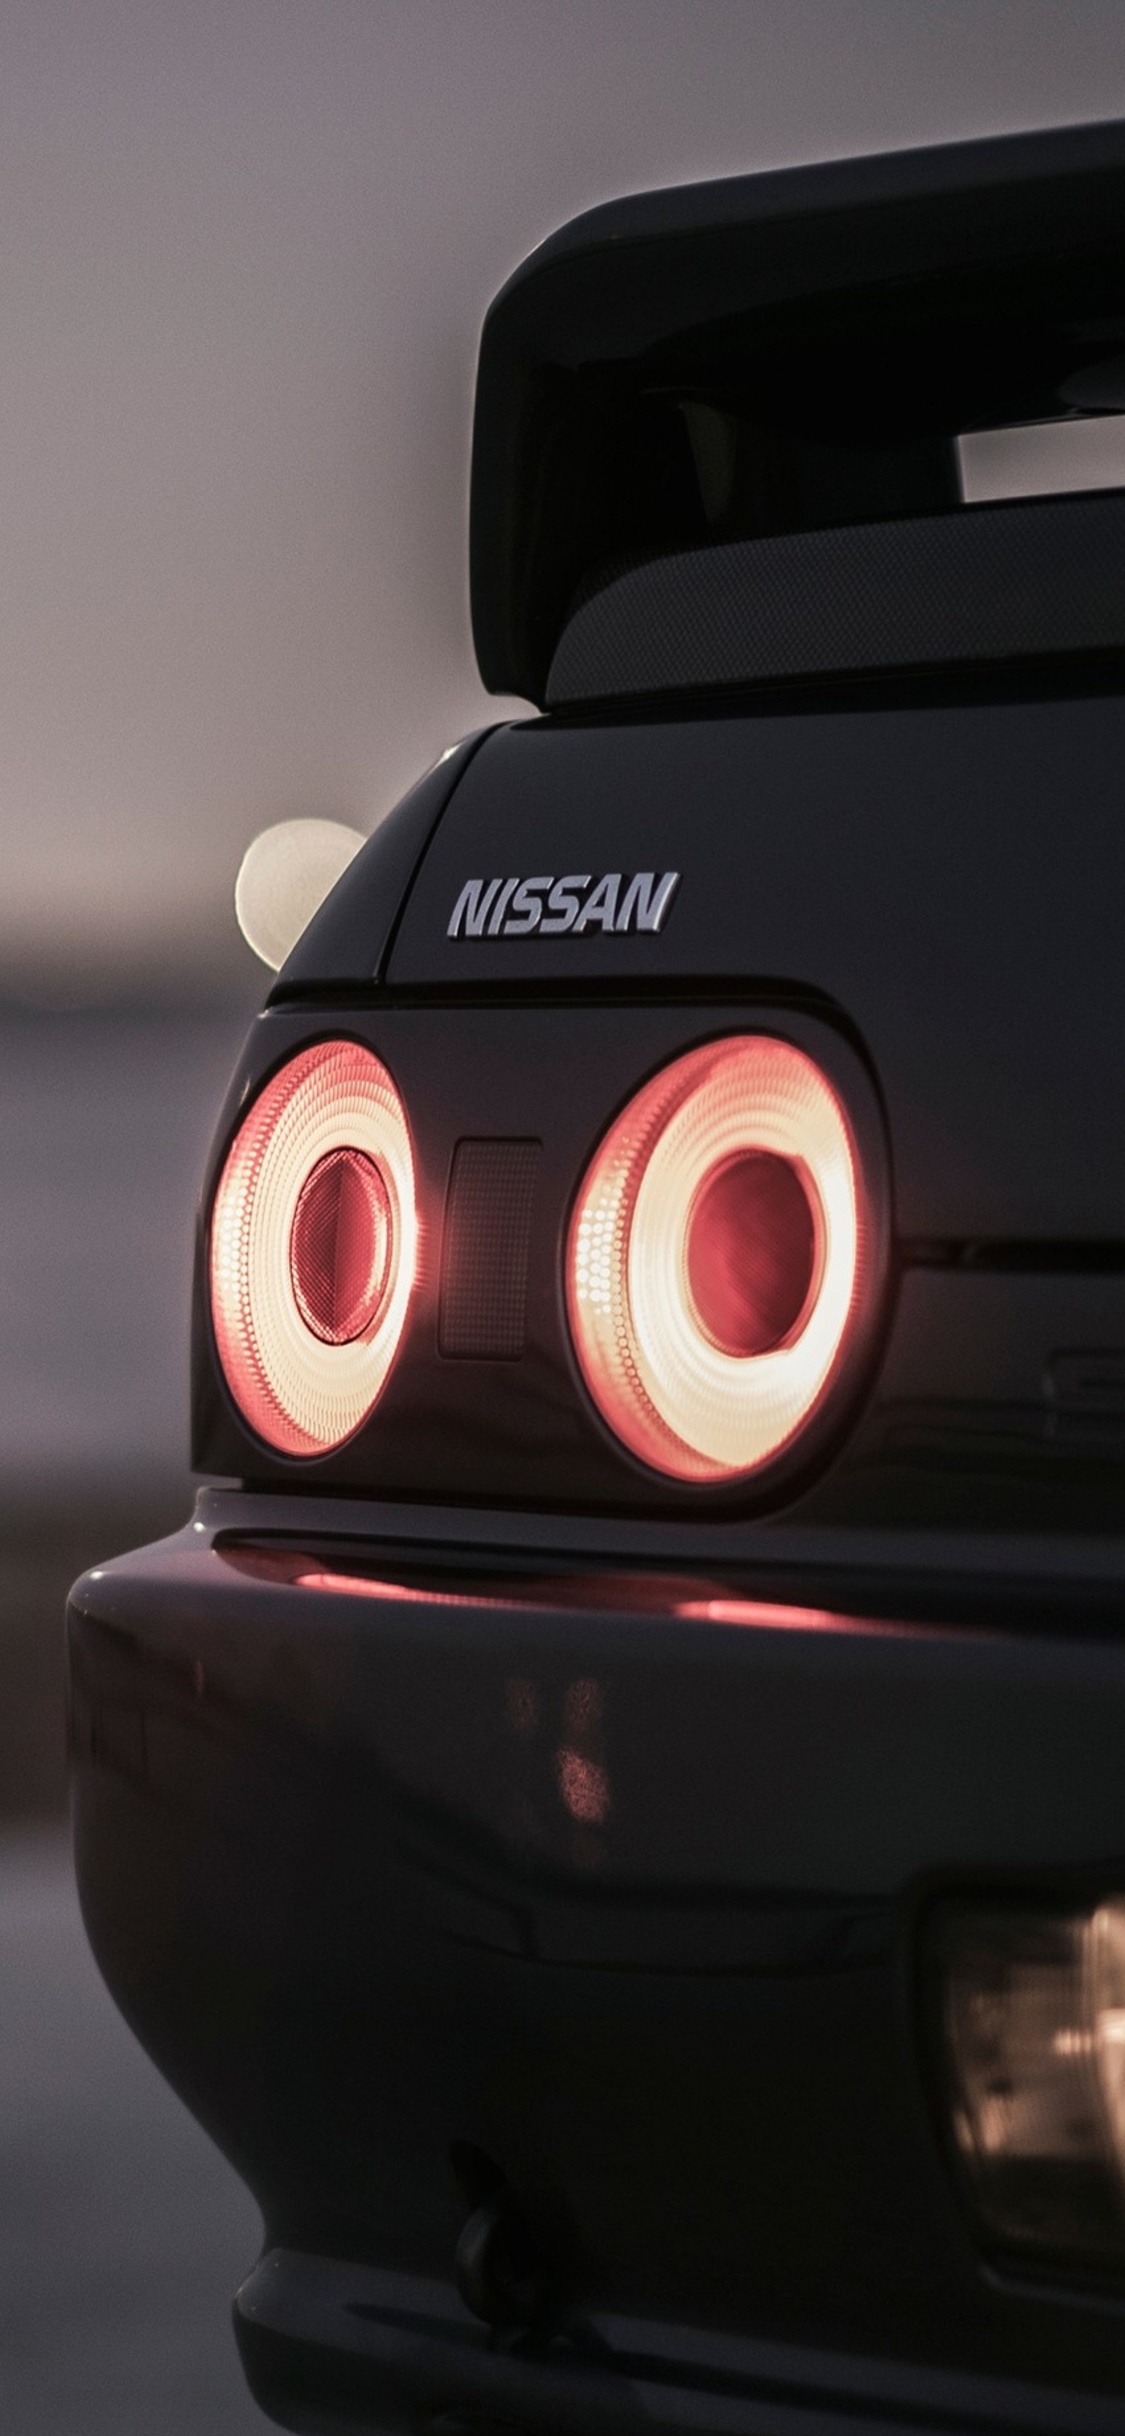 Nissan Skyline R32 Tail Lights iPhone XS, iPhone iPhone X HD 4k Wallpaper, Image, Background, Photo and Picture